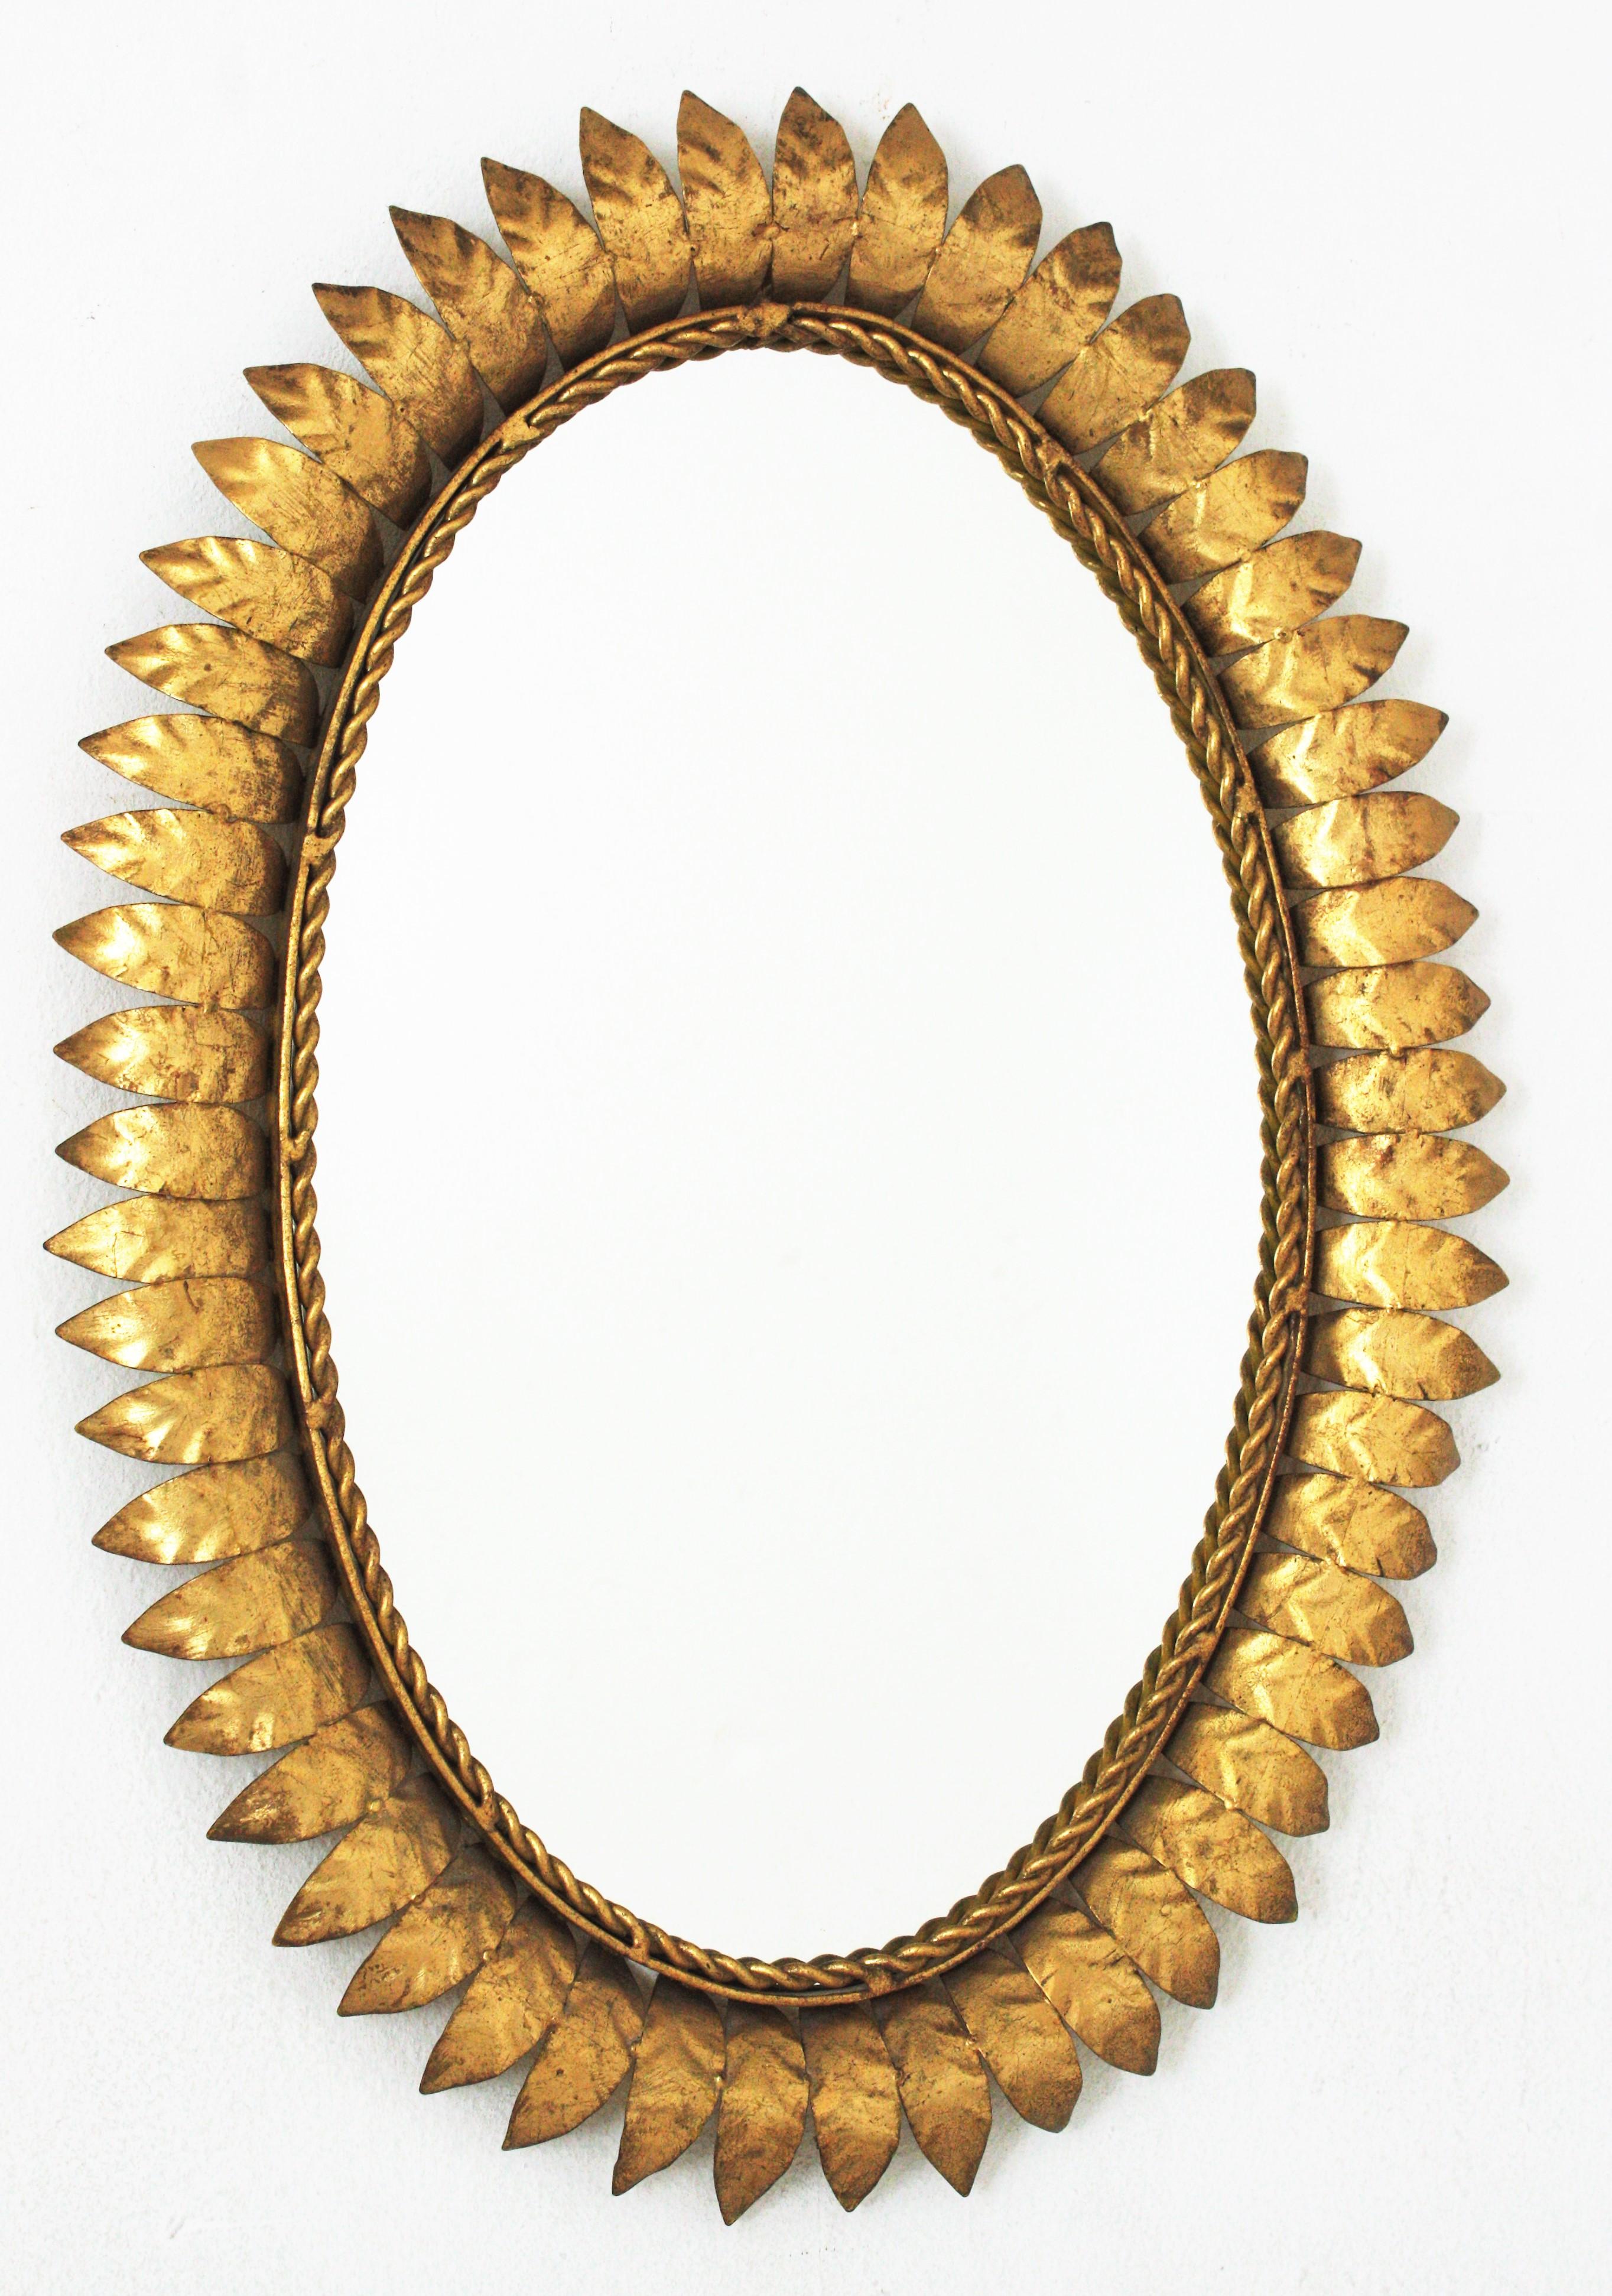 Mid-Century Modern iron sunburst oval wall mirror with leafed frame and gold leaf finish, Spain, 1950s.
This eye-catching leafed sunburst mirror has a very detailed frame, entirely made in gilt iron and showing its original patina and gold leaf